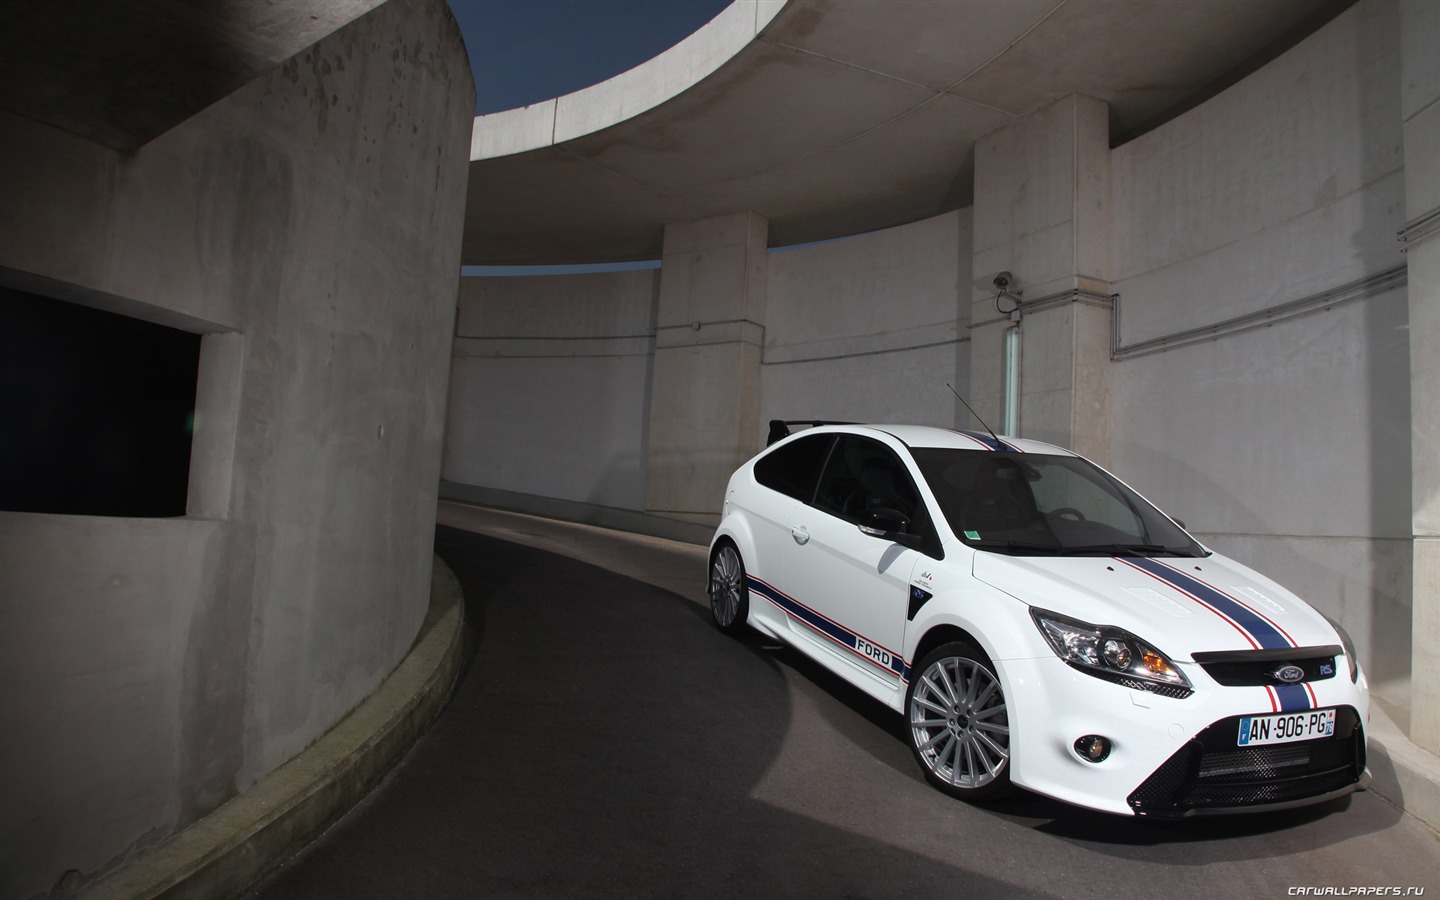 Ford Focus RS Le Mans Classic - 2010 福特7 - 1440x900